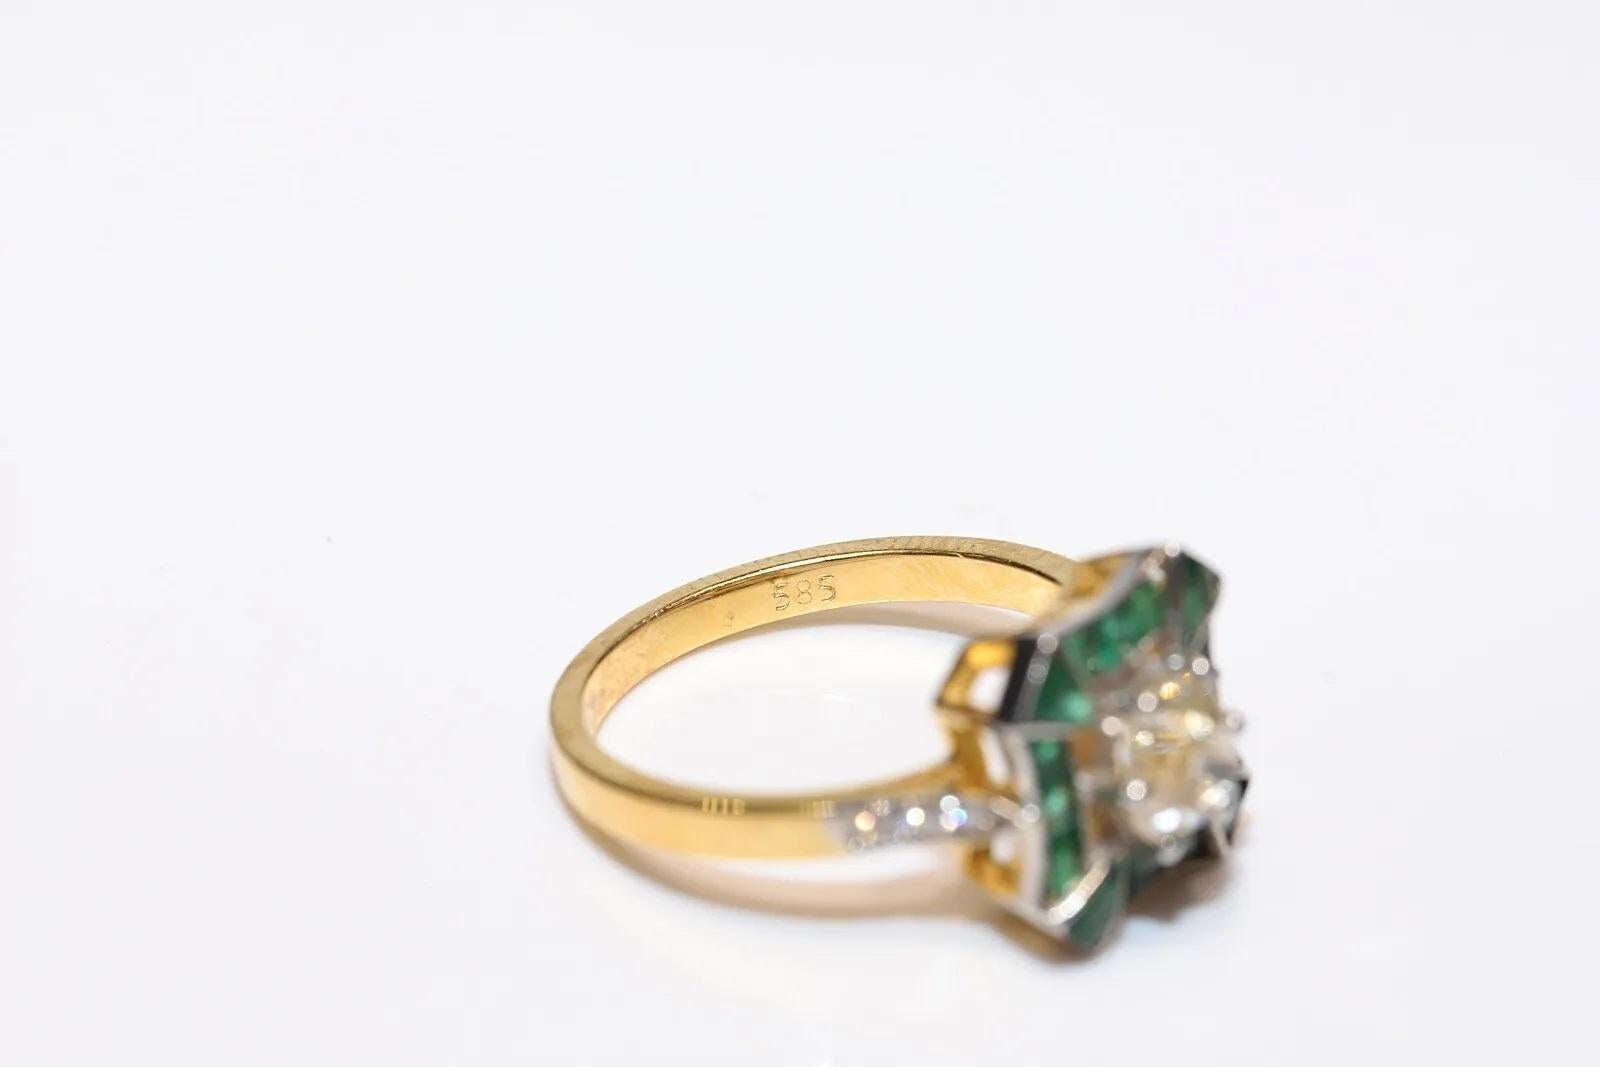 New Made 14k Gold Natural Old Cut Diamond And Caliber Emerald Solitaire Ring For Sale 2